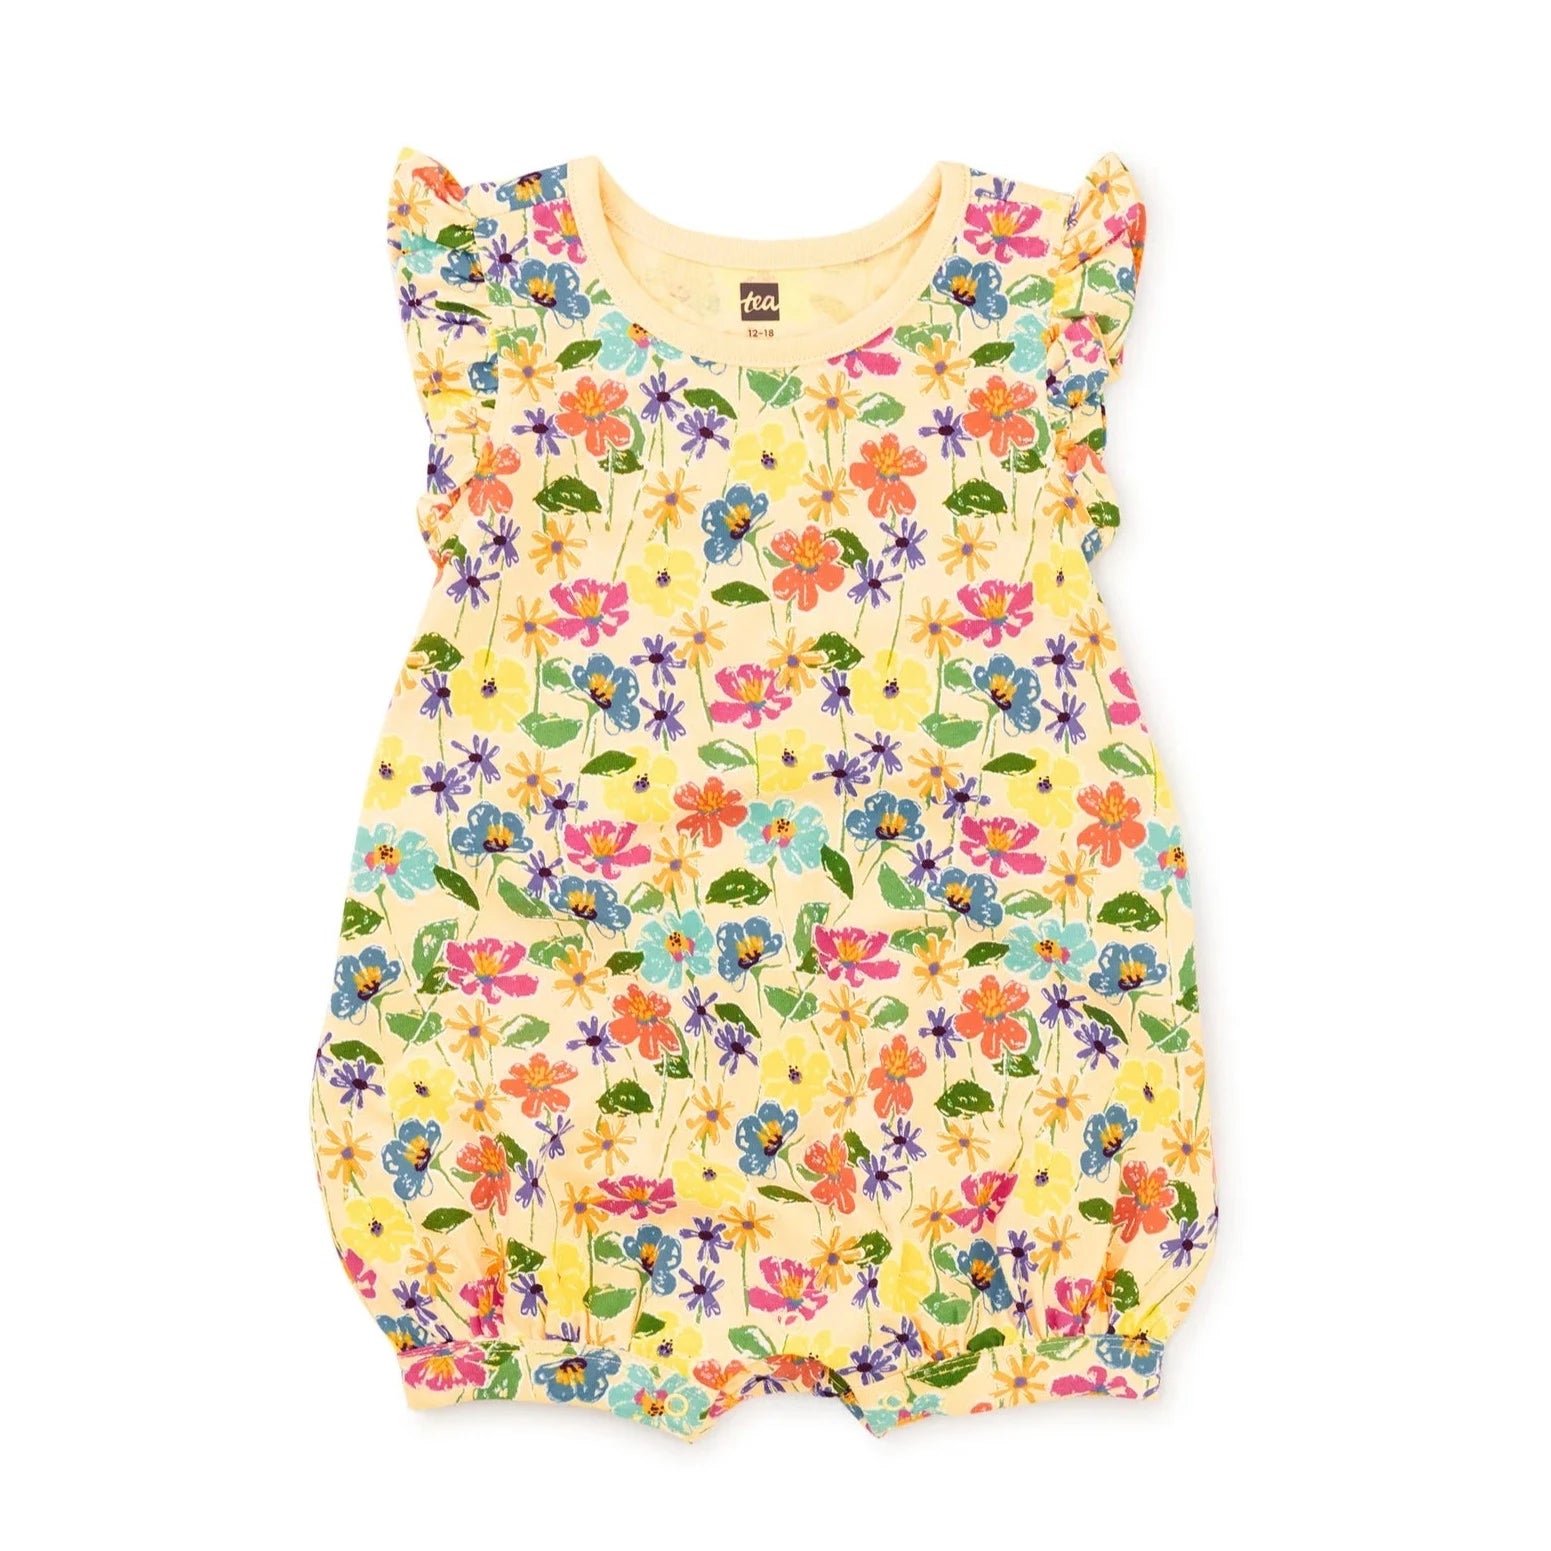 Tea Collection Flutter Baby Romper - Sketched Wild Cosmo Floral 